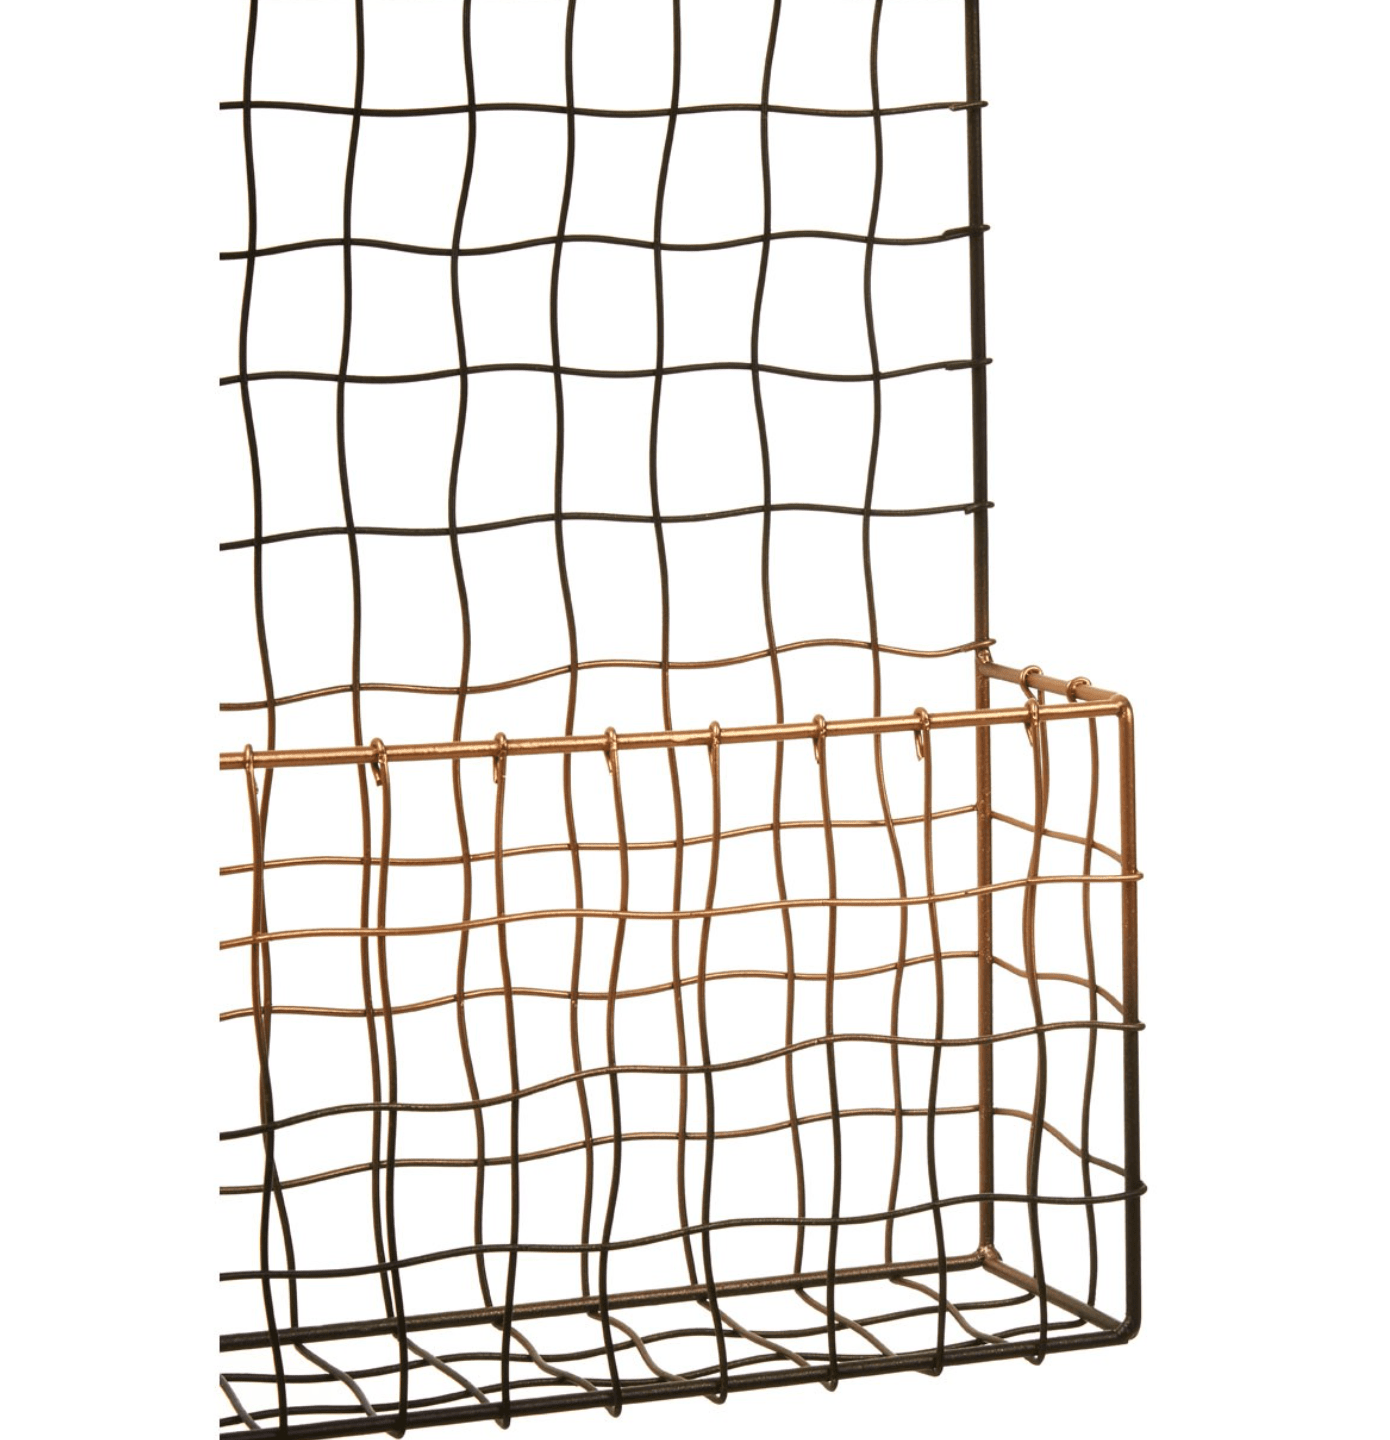 Copper And Black Metal Magazine Rack - Outlet - Save 20%